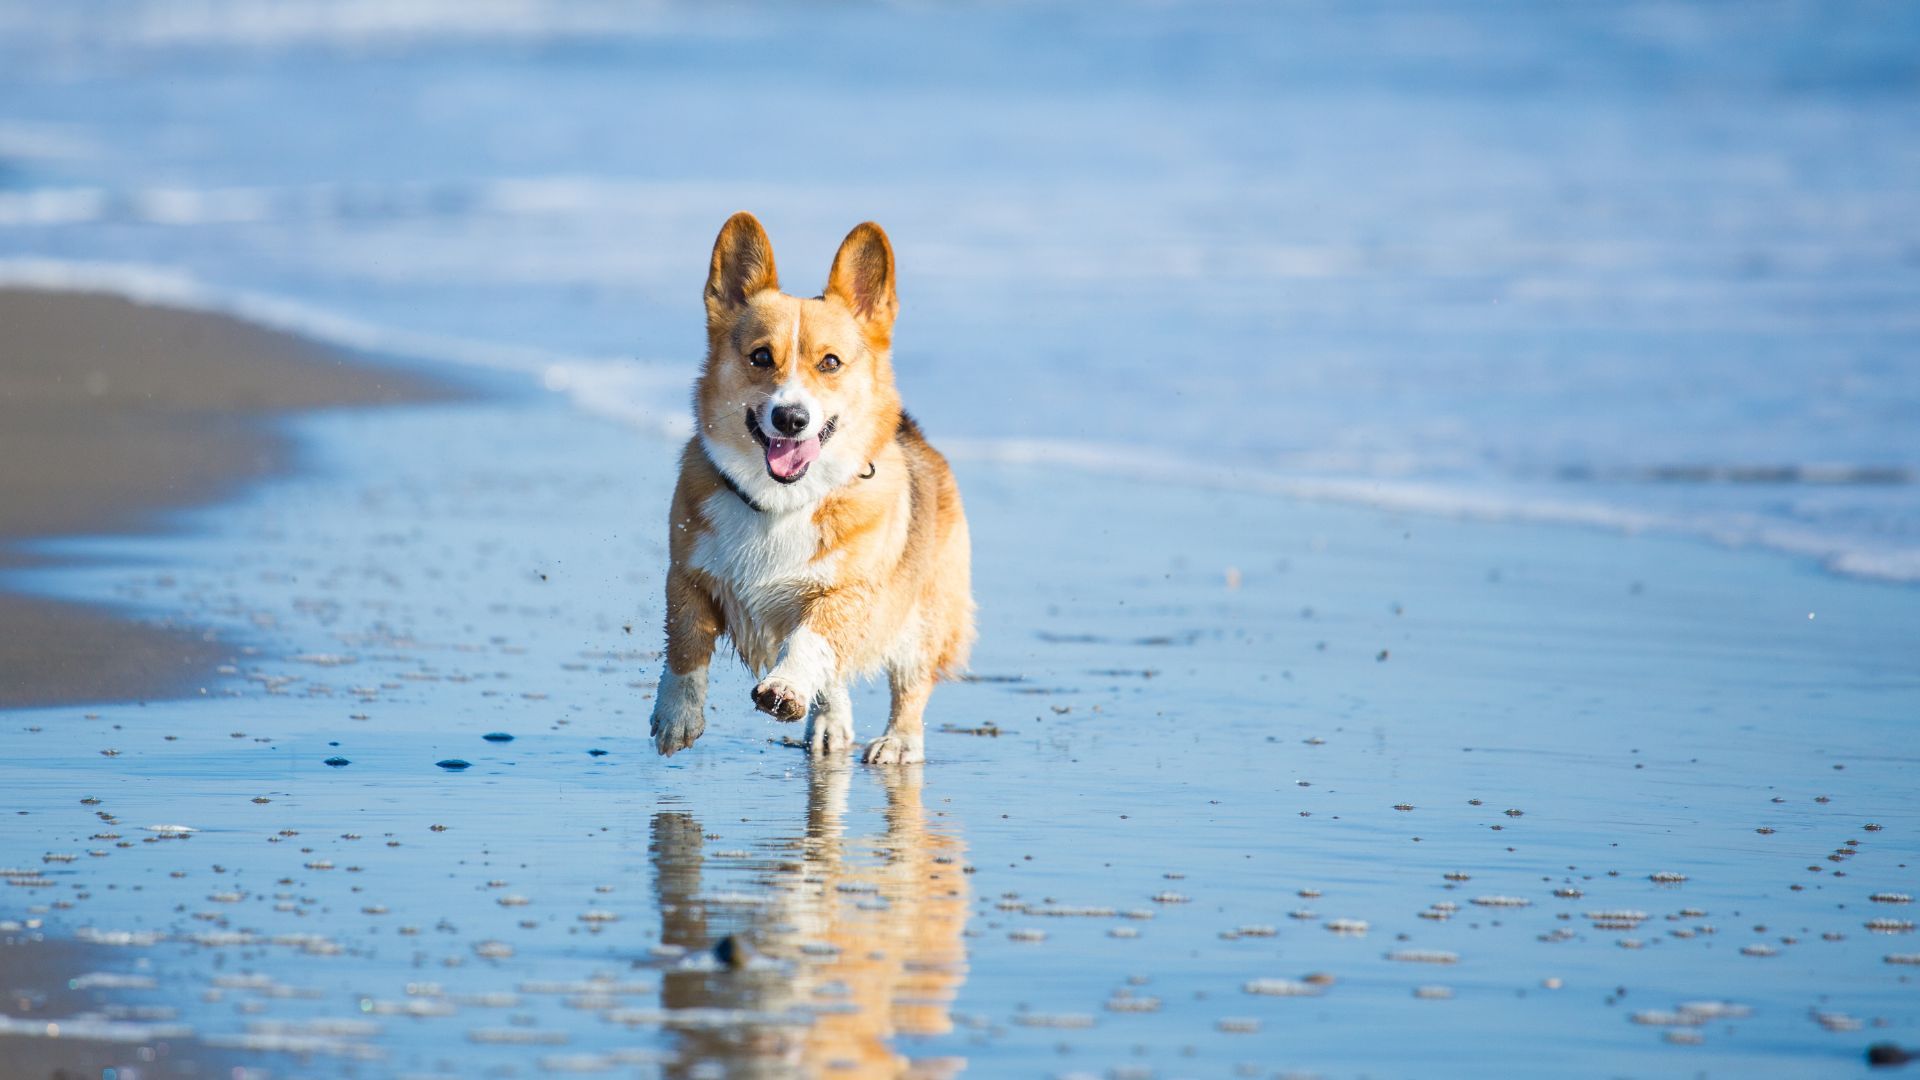 <p>                     Also known as Its Beach, before the hours of 10am and after 4pm your furry friend can run, walk and explore without being strapped to one another. However if you plan on visiting between these hours, just remember to stock up on dog leashes so you can keep your pooch close by.                   </p>